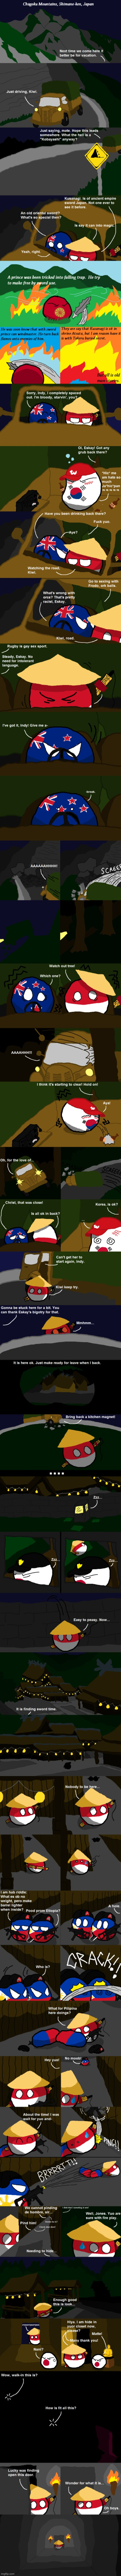 another country balls comic | image tagged in another country balls comic | made w/ Imgflip meme maker